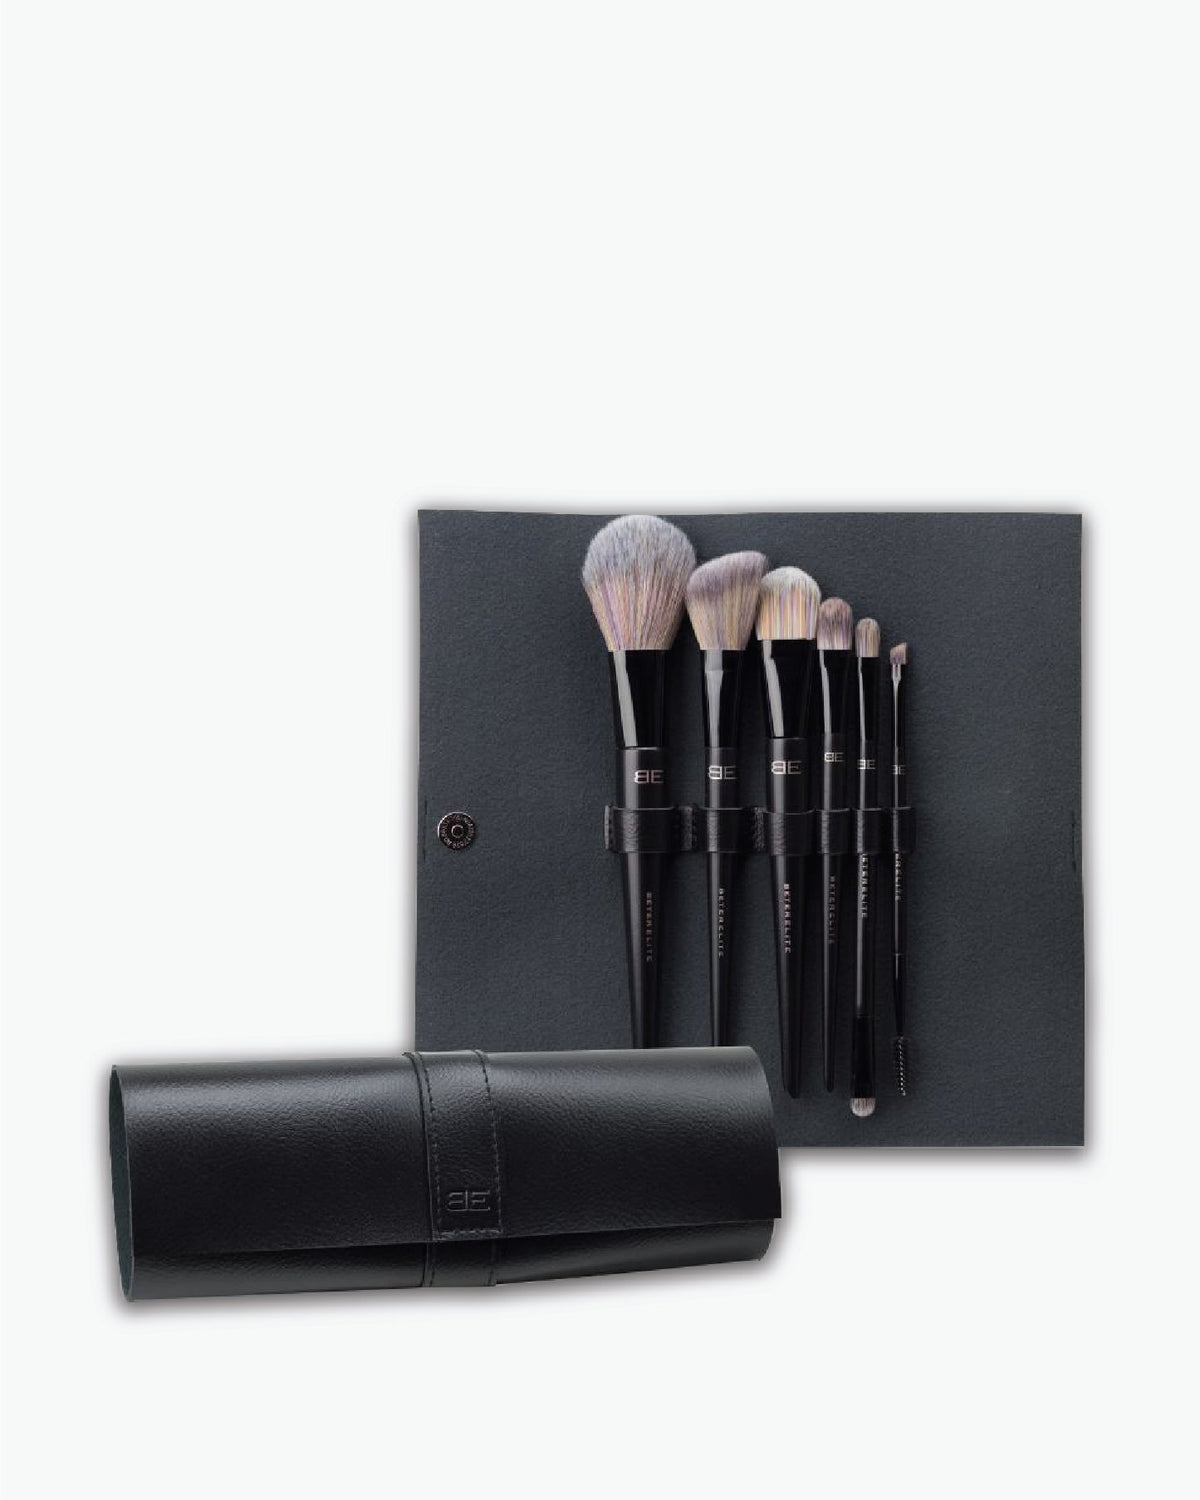 Roll-Up Case With 6 Make Up Brushes